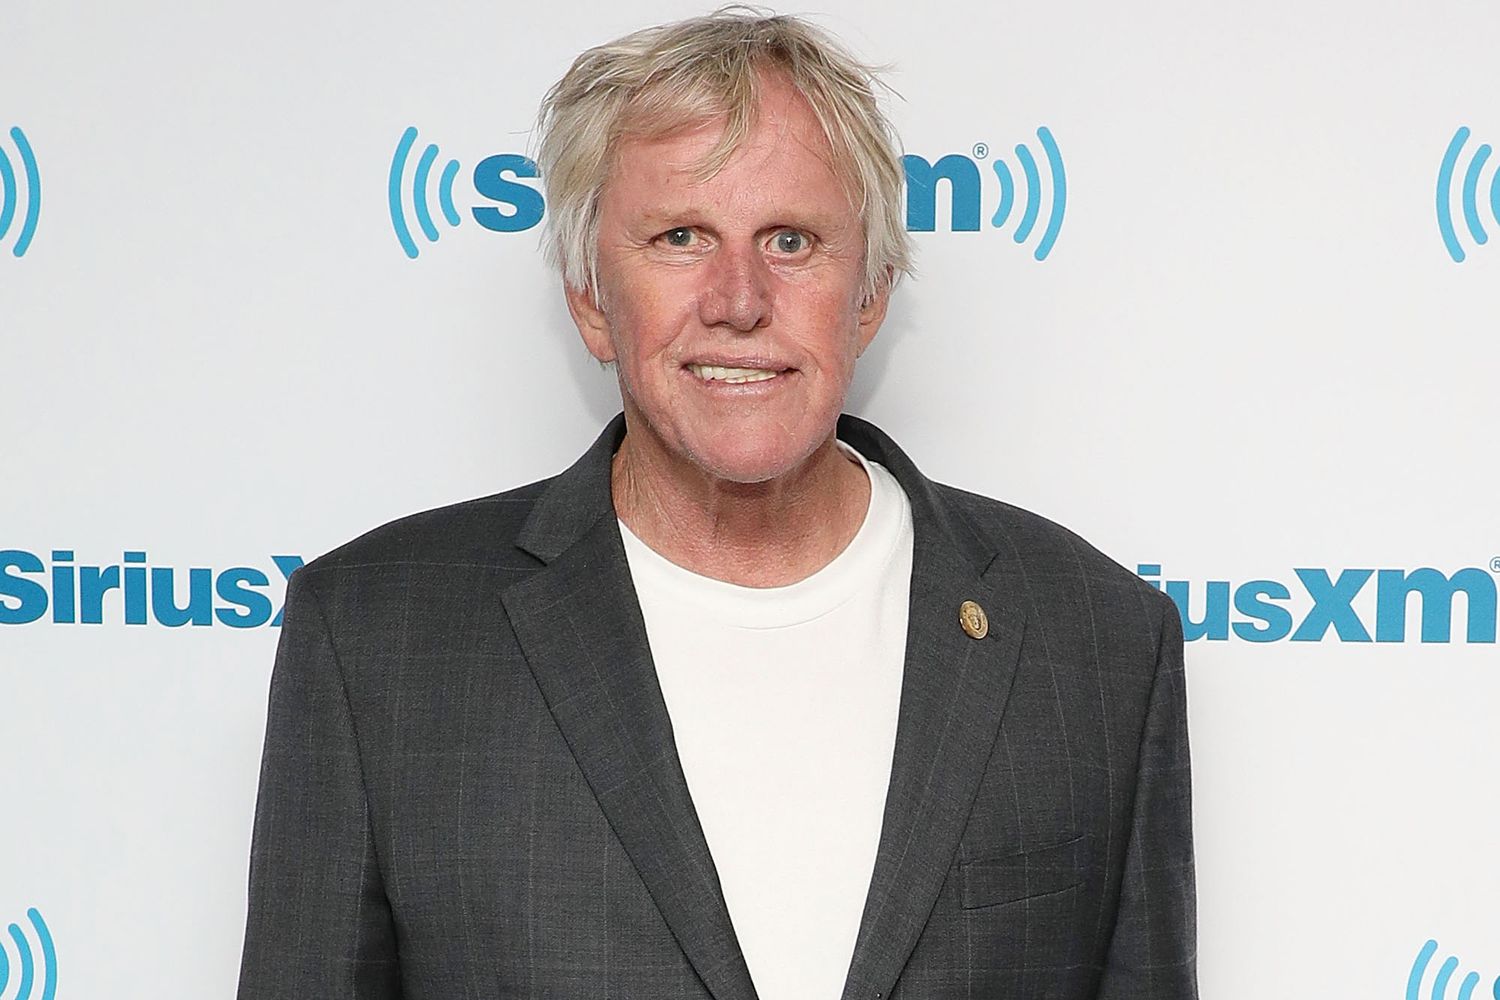 NEW YORK, NY - SEPTEMBER 05: Gary Busey visits the SiriusXM Studios on September 5, 2018 in New York City. (Photo by Taylor Hill/Getty Images)